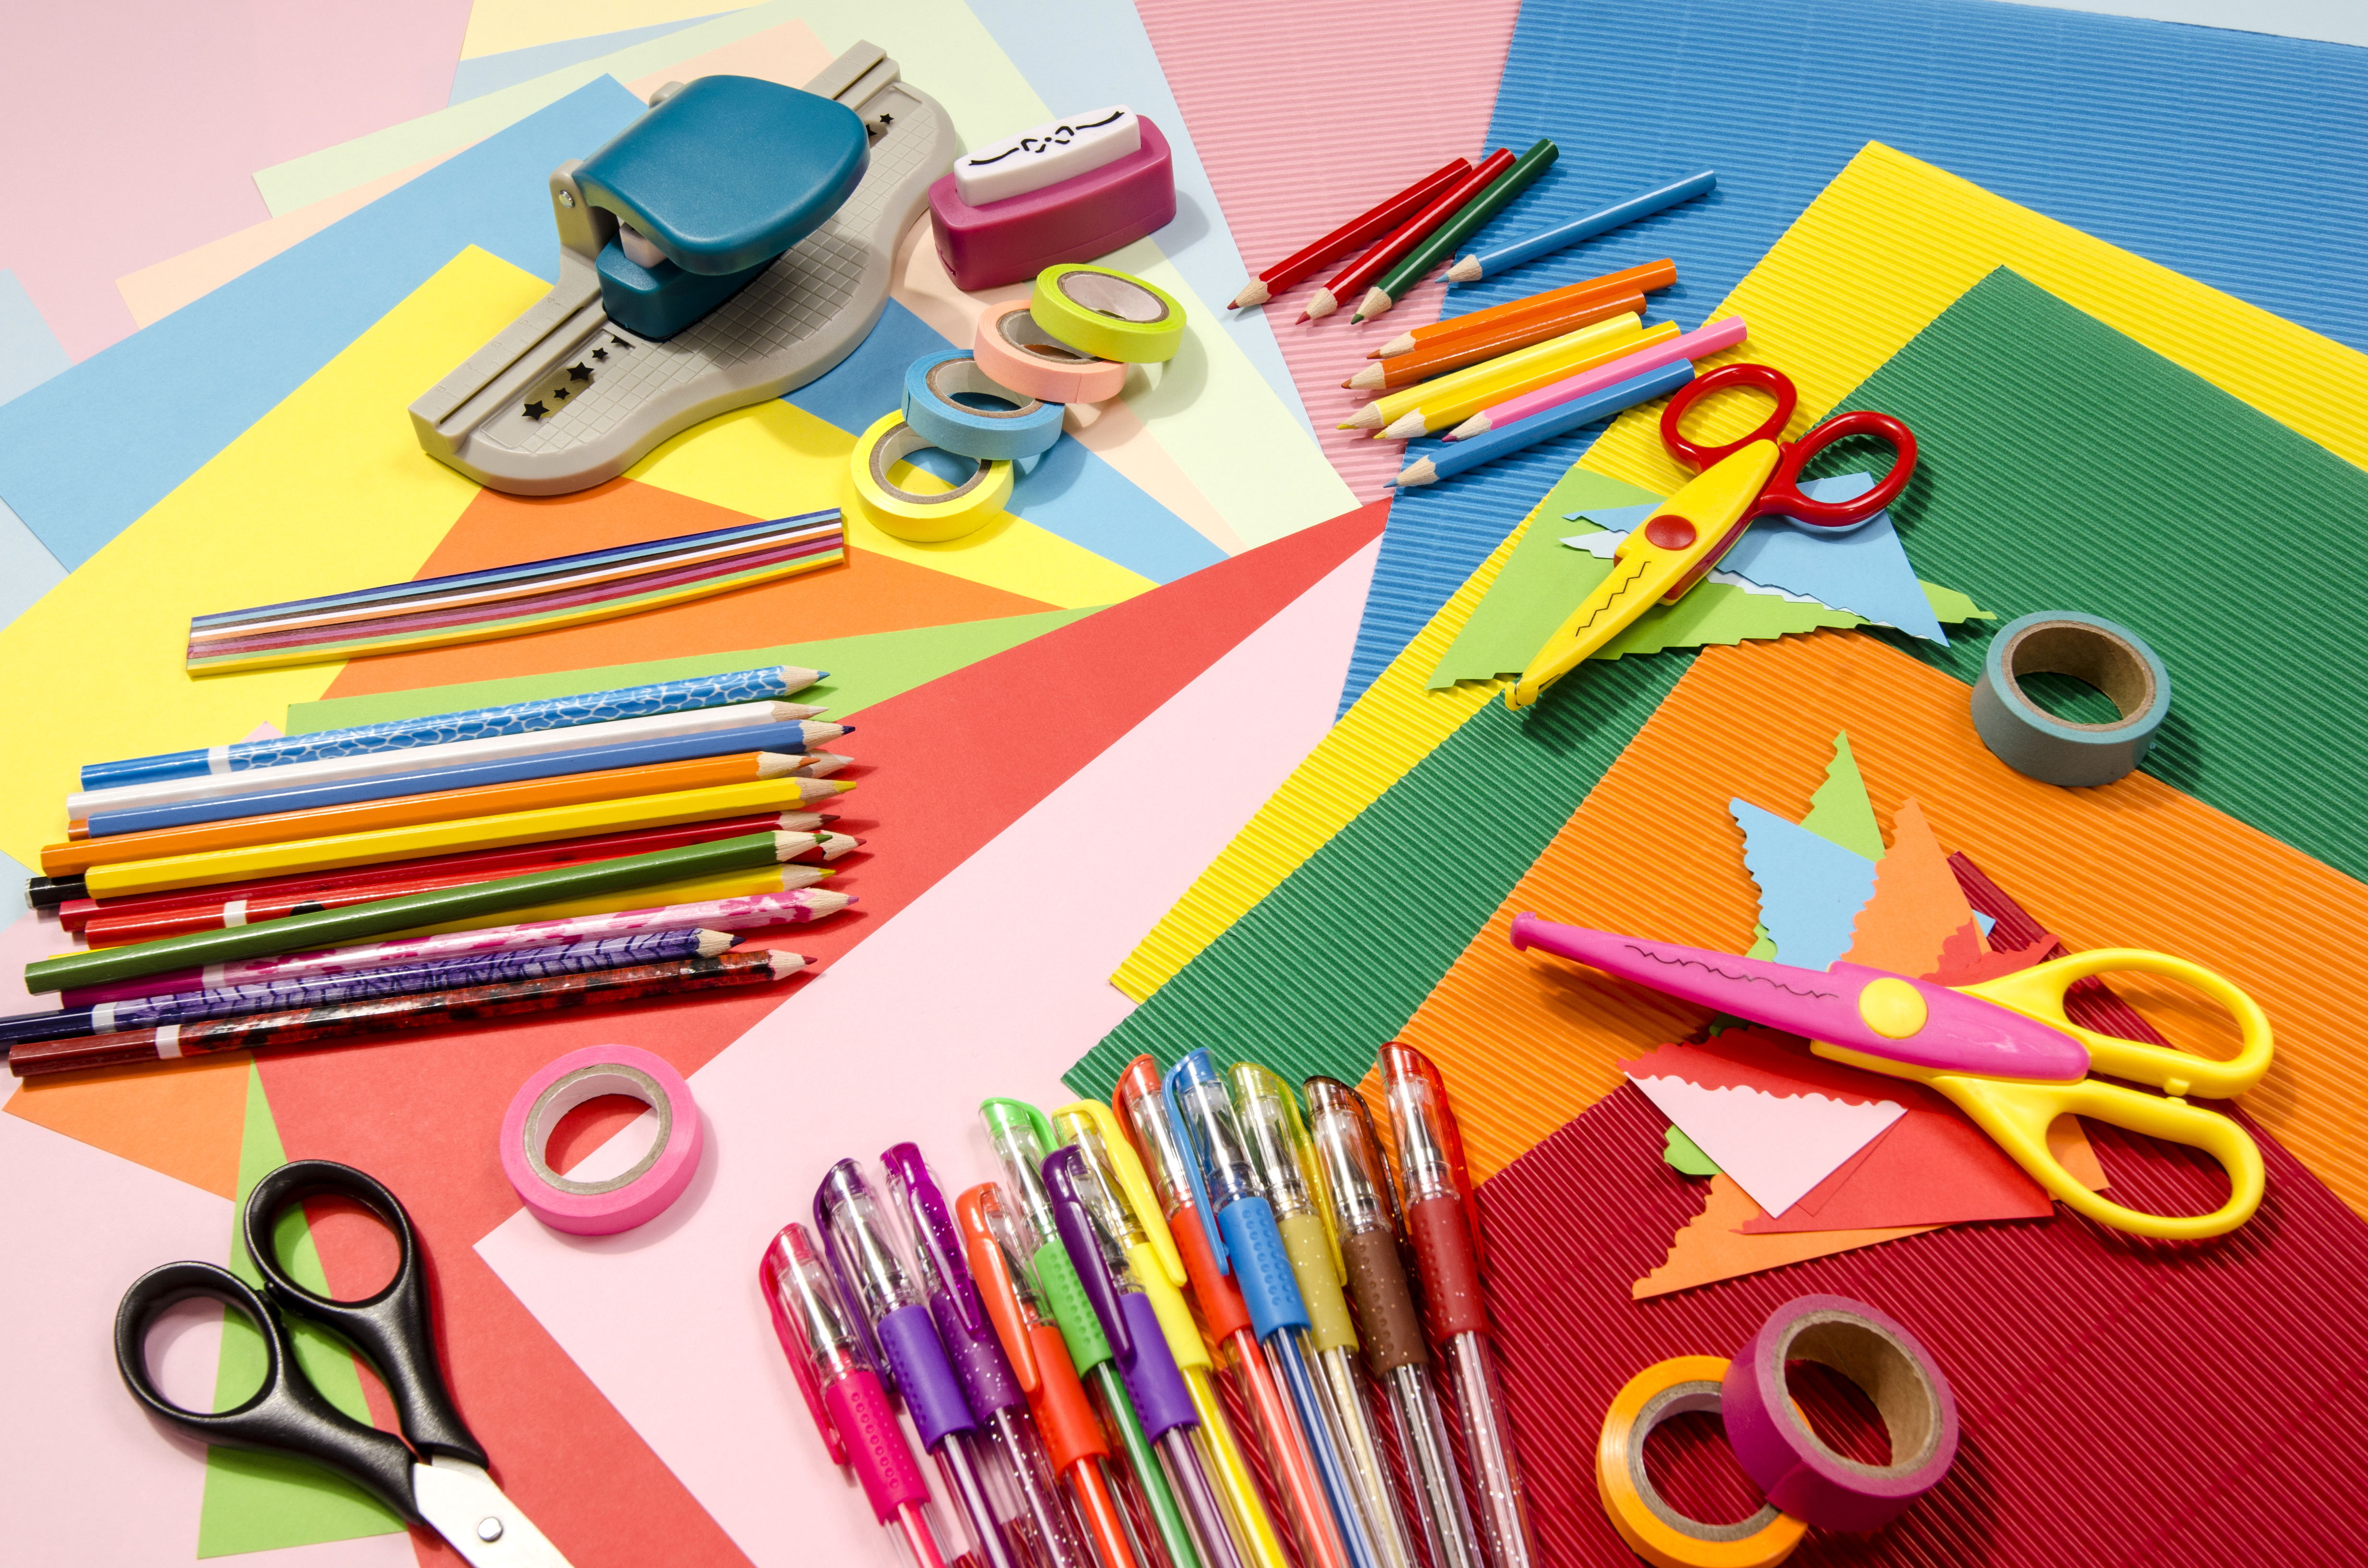 Colorful arts and crafts supplies